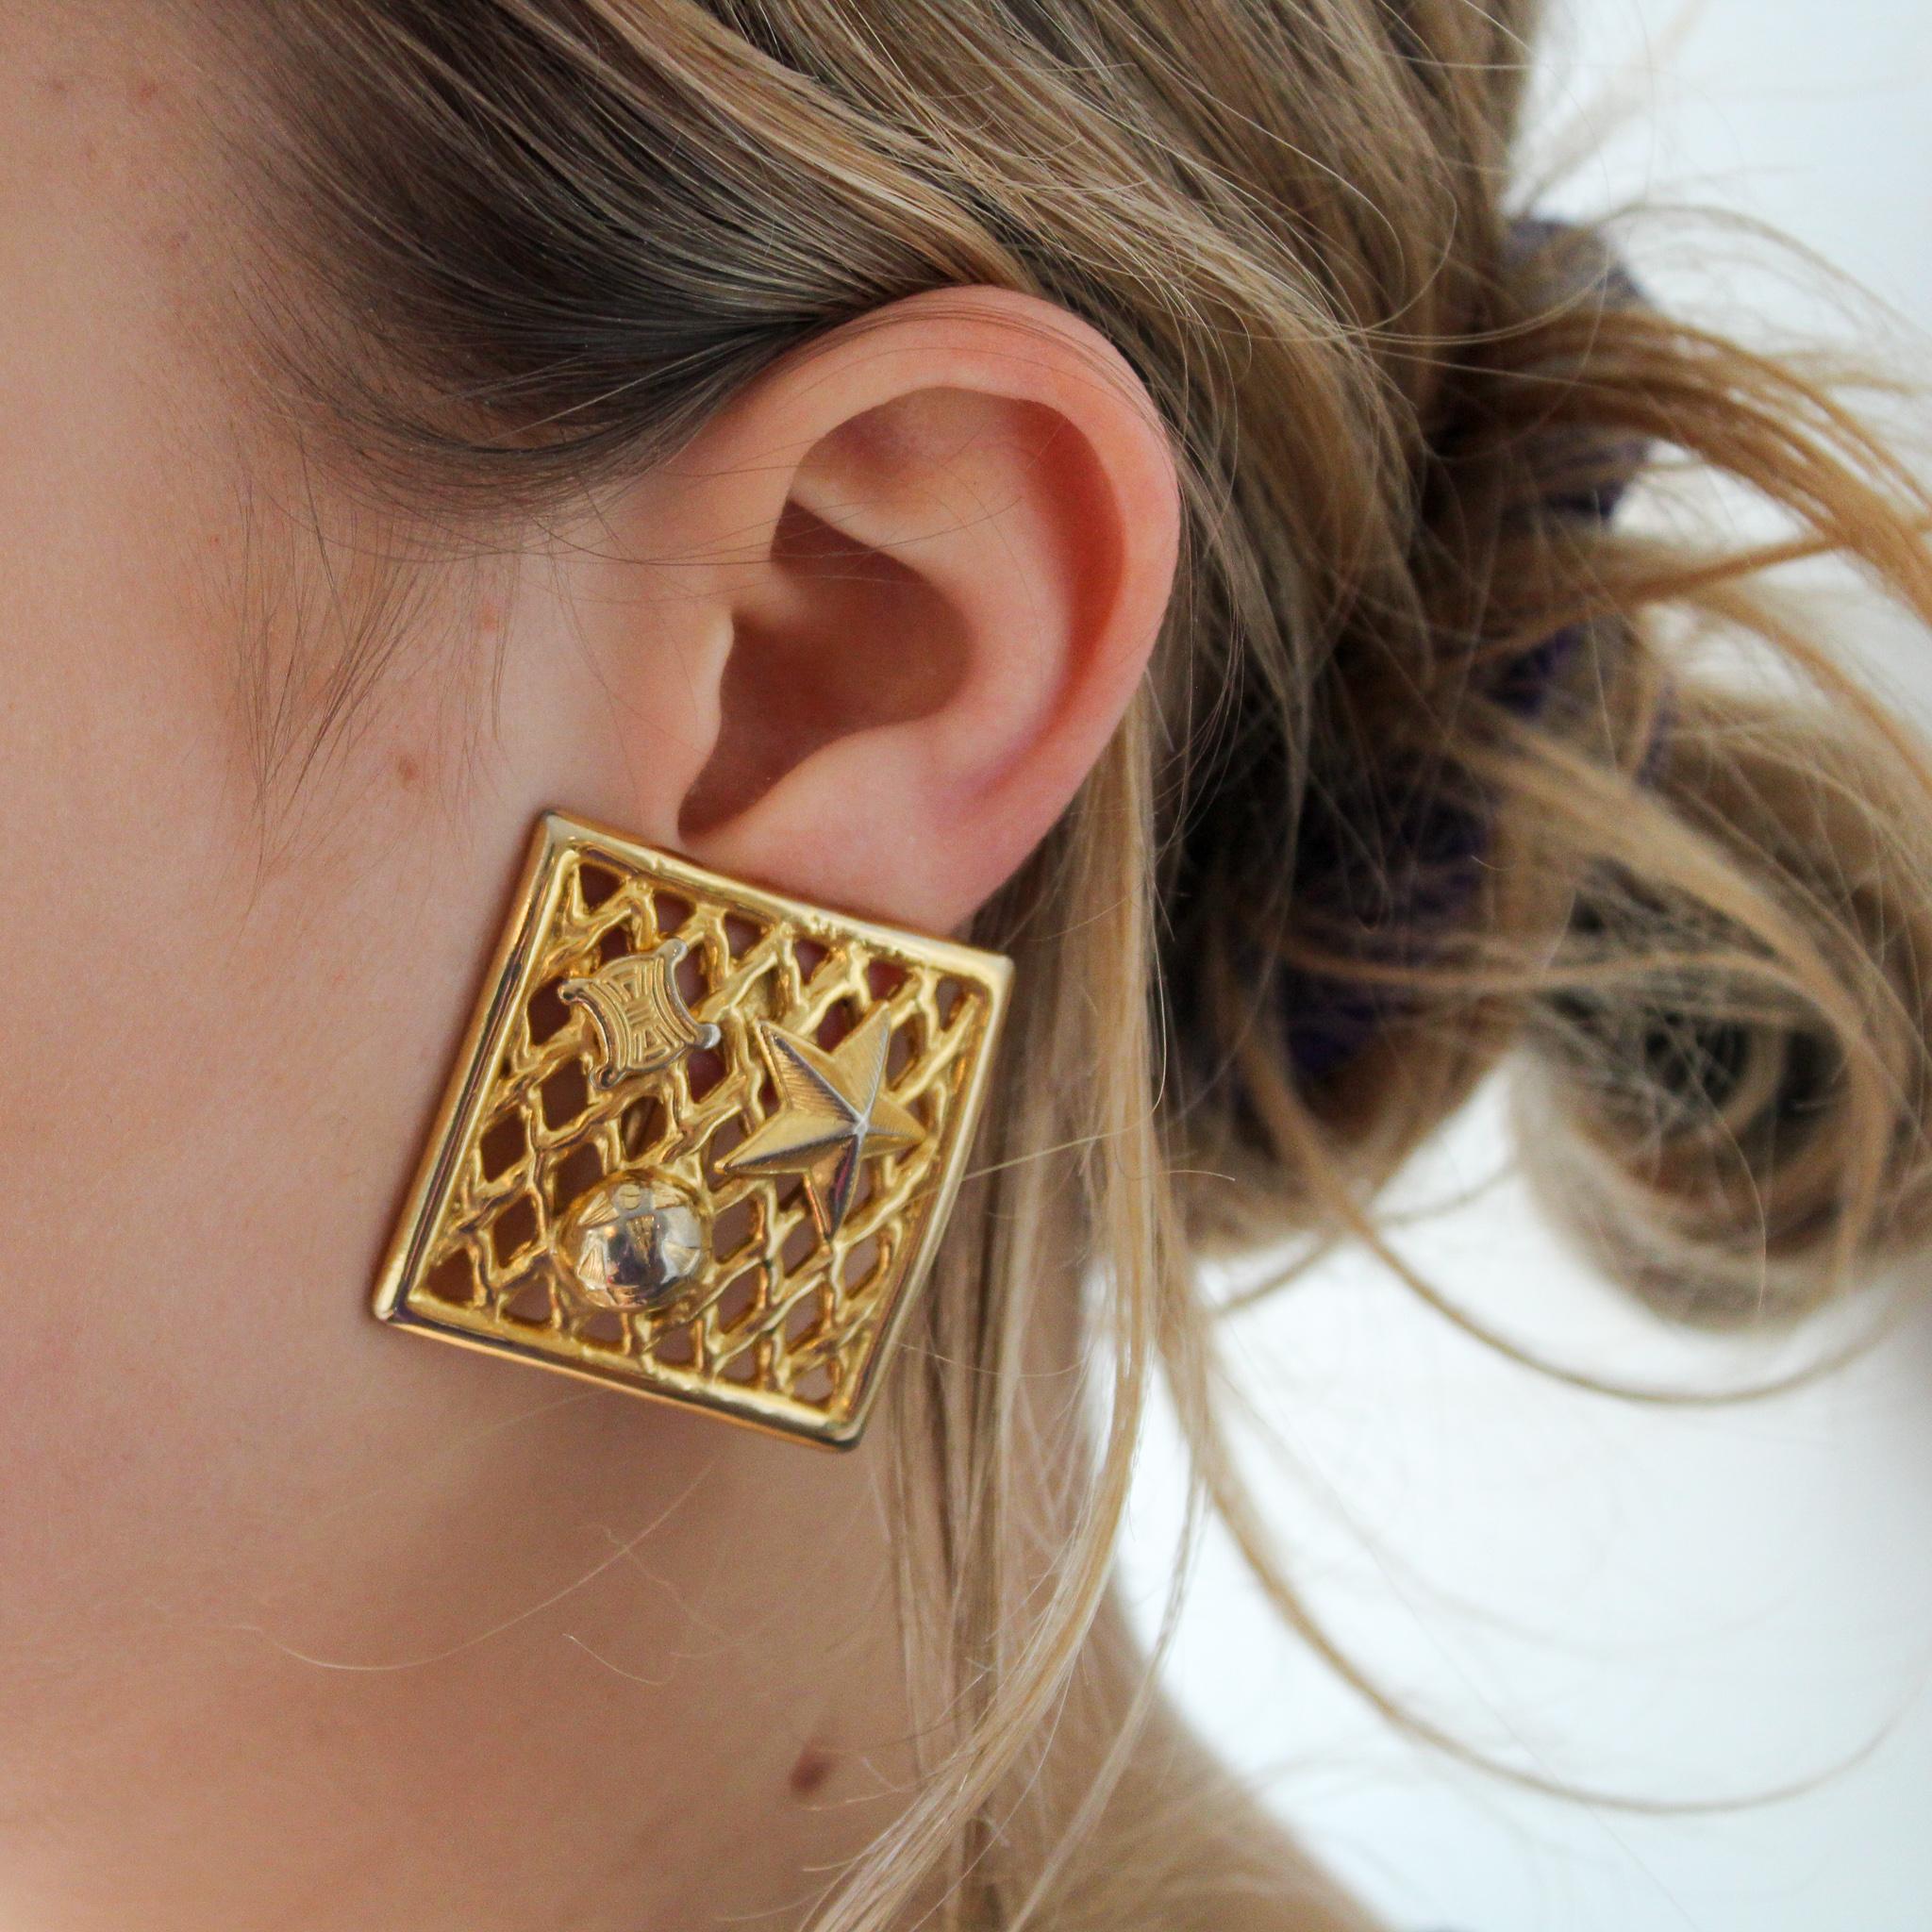 Celine 1990s Vintage Clip On Earrings

Incredible statement earrings from Celine from the 1990s collection 

 Detail
-Made in France in 1990
-Crafted from high quality gold plated metal
-Lattice work with the iconic star and globe.  

Size & Fit
-3